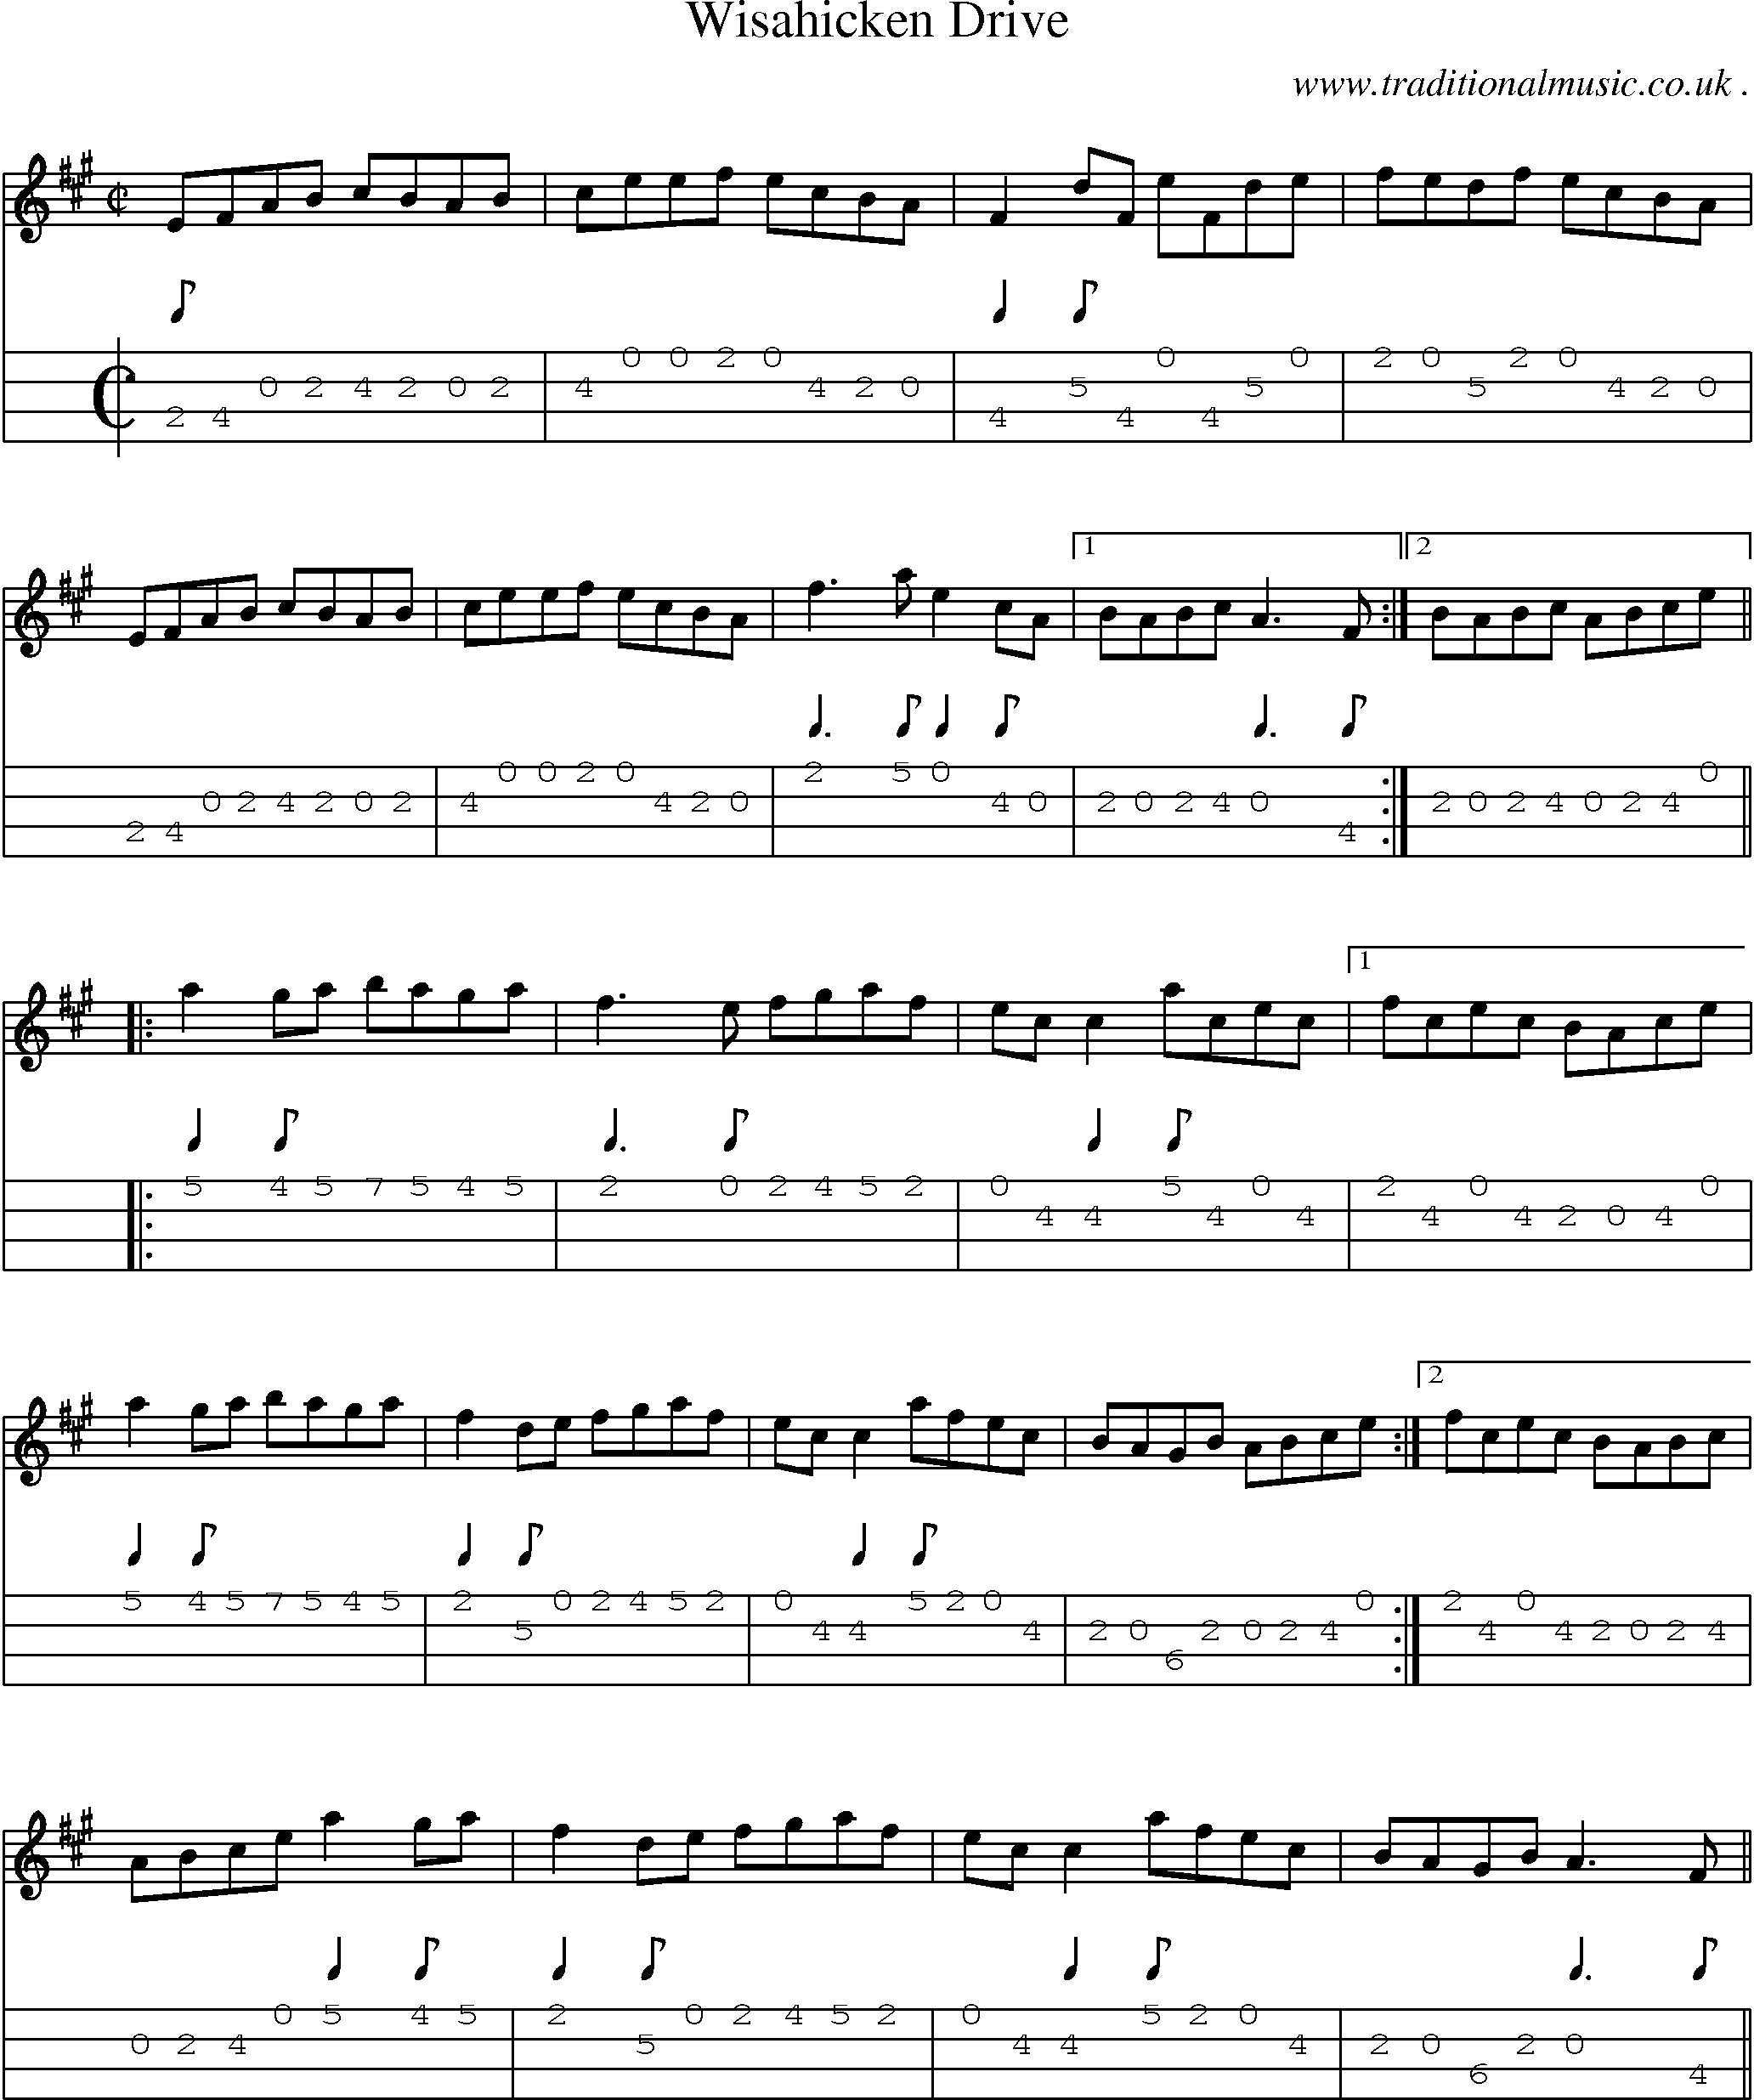 Sheet-Music and Mandolin Tabs for Wisahicken Drive